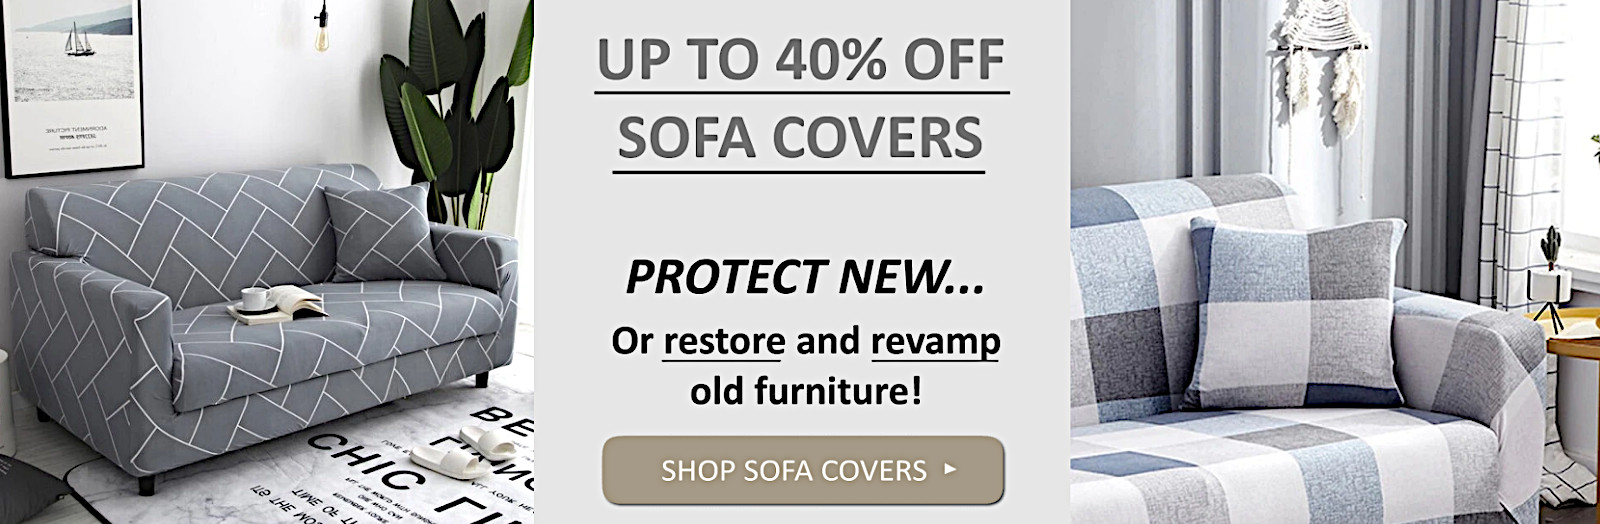 Price Reduction sofa covers